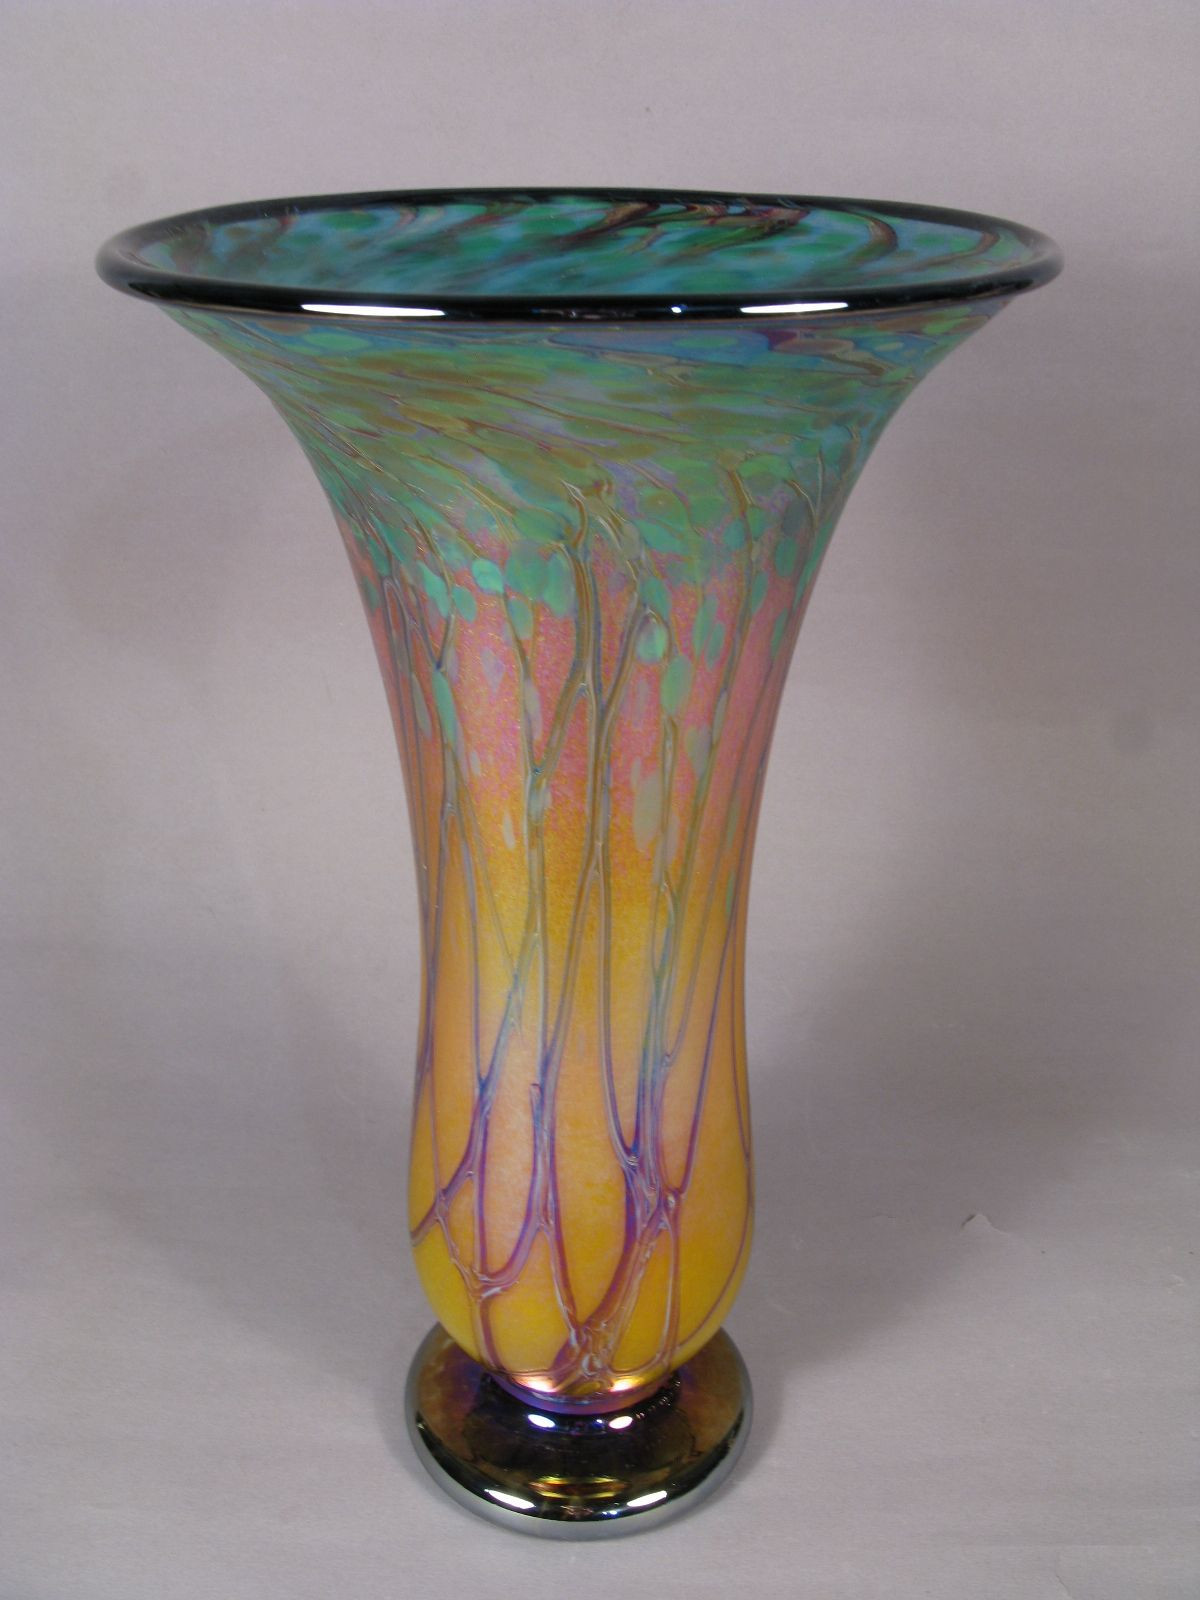 29 Great Types Of Glass Vases 2024 free download types of glass vases of sunset fumed vase hand blown art glass glassquest com blown with sunset fumed vase hand blown art glass glassquest com